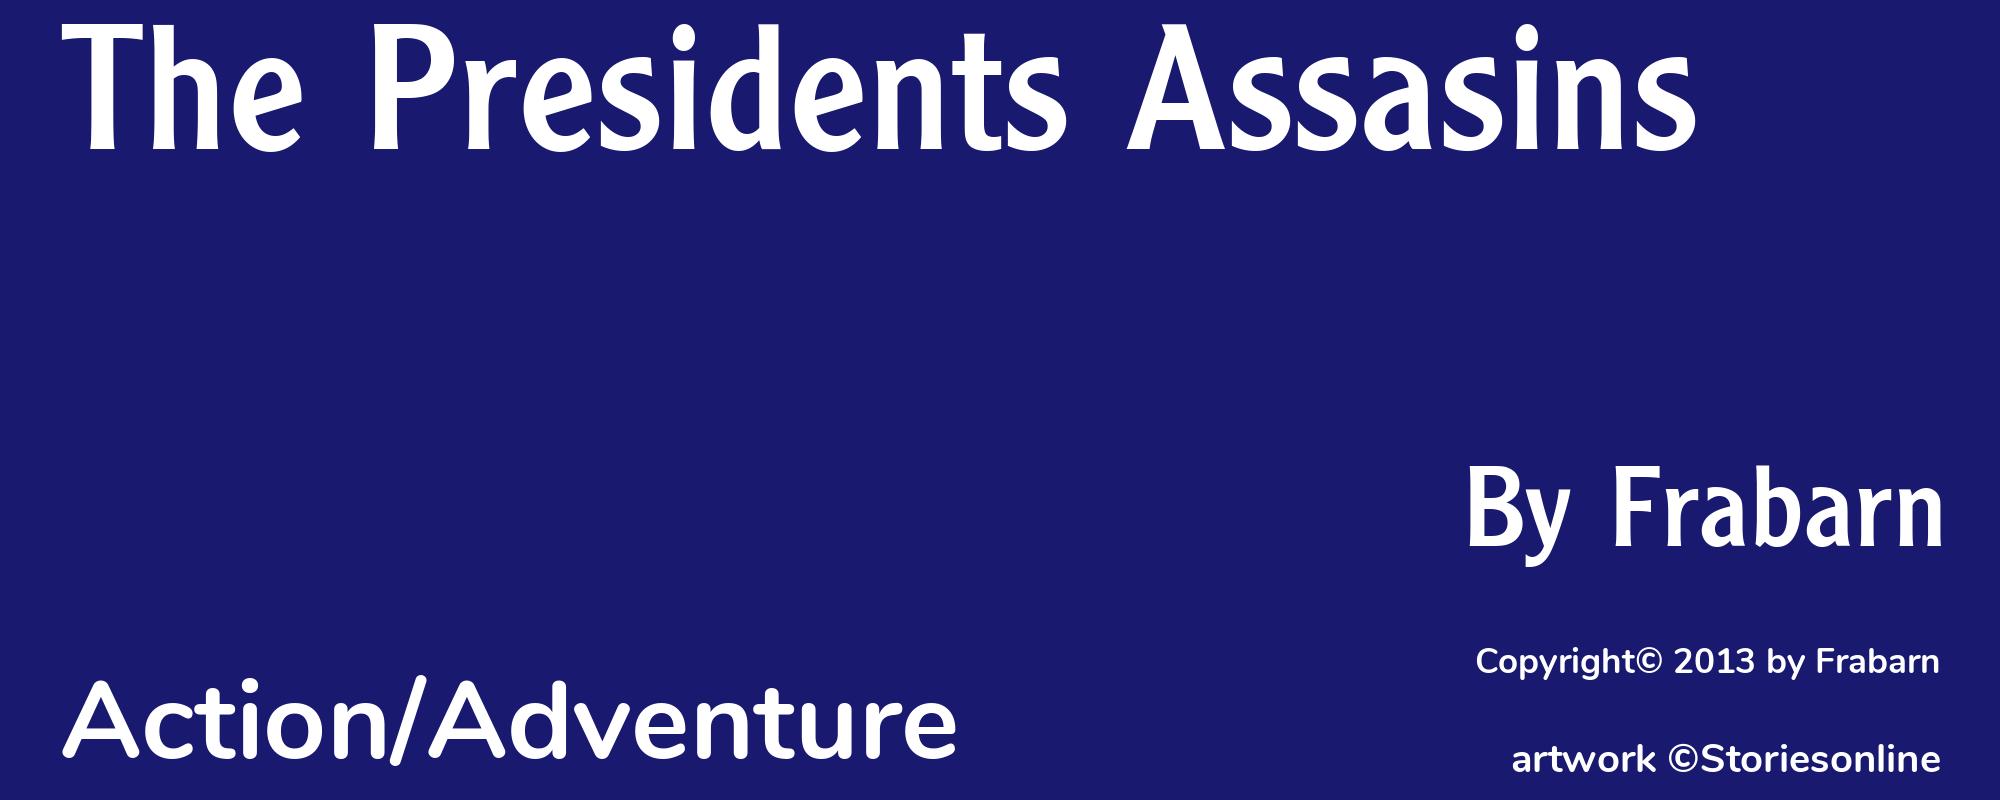 The Presidents Assasins - Cover